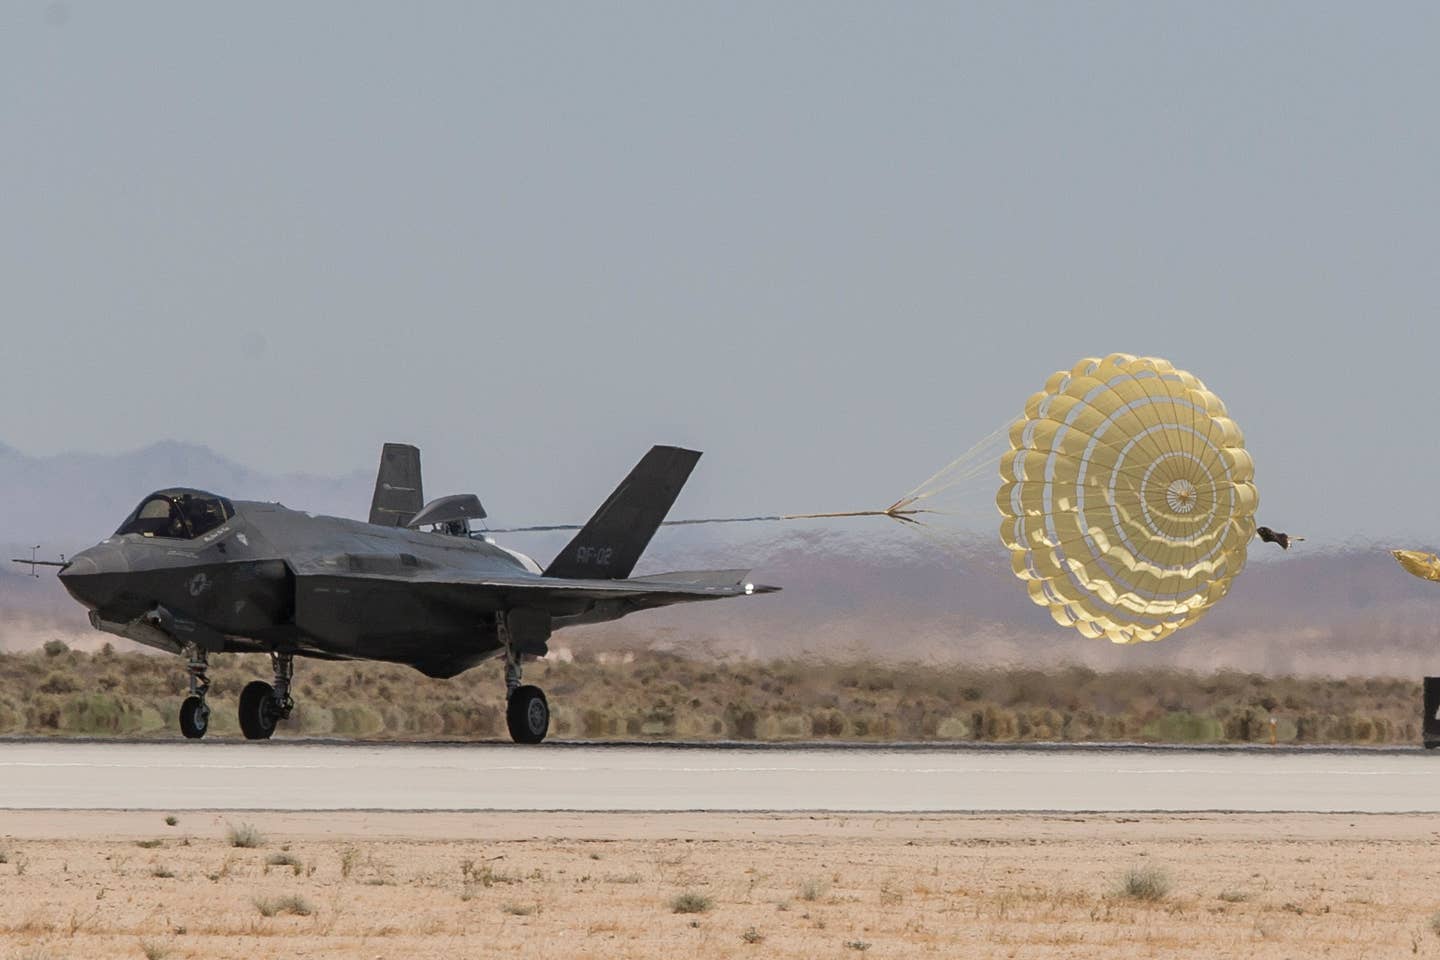 One of the F-35A prototypes, modified with the drag chute, deploys it upon landing during early tests at Edwards Air Force Base, California. <em>Lockheed Martin photo by Jonathan Case</em><br>